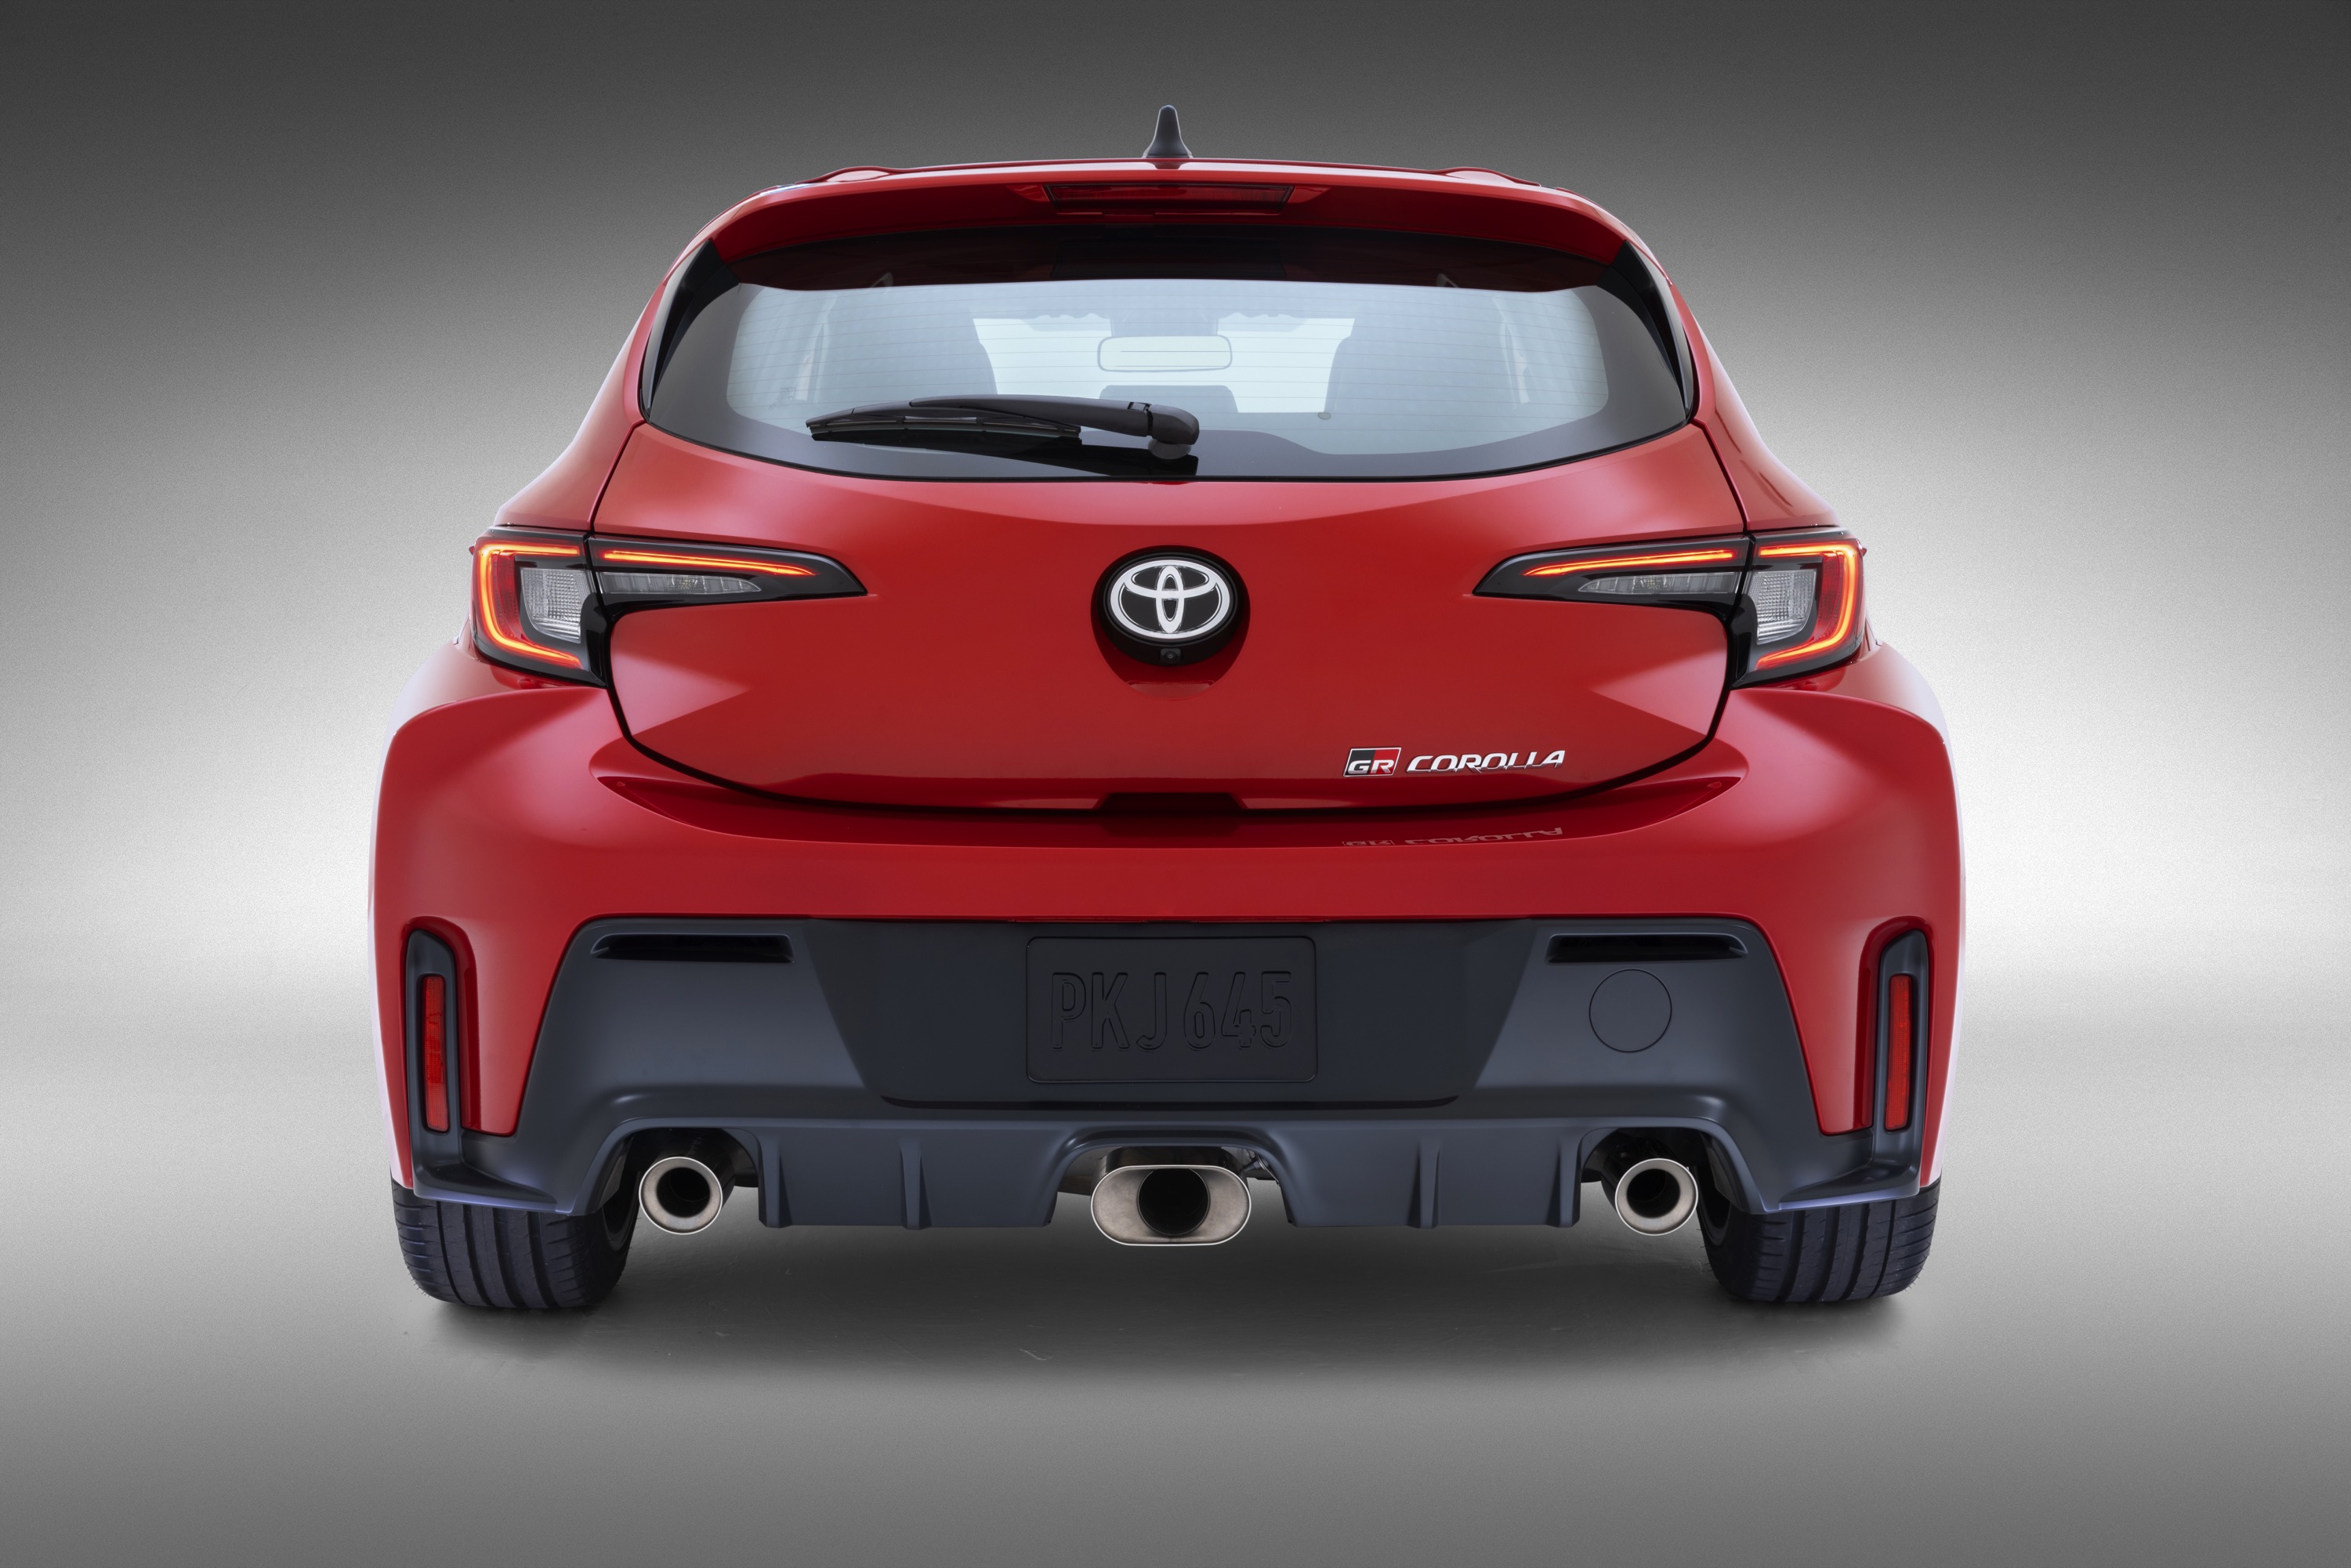 Three cylinders, all-wheel drive, and 300 hp: The Toyota GR Corolla